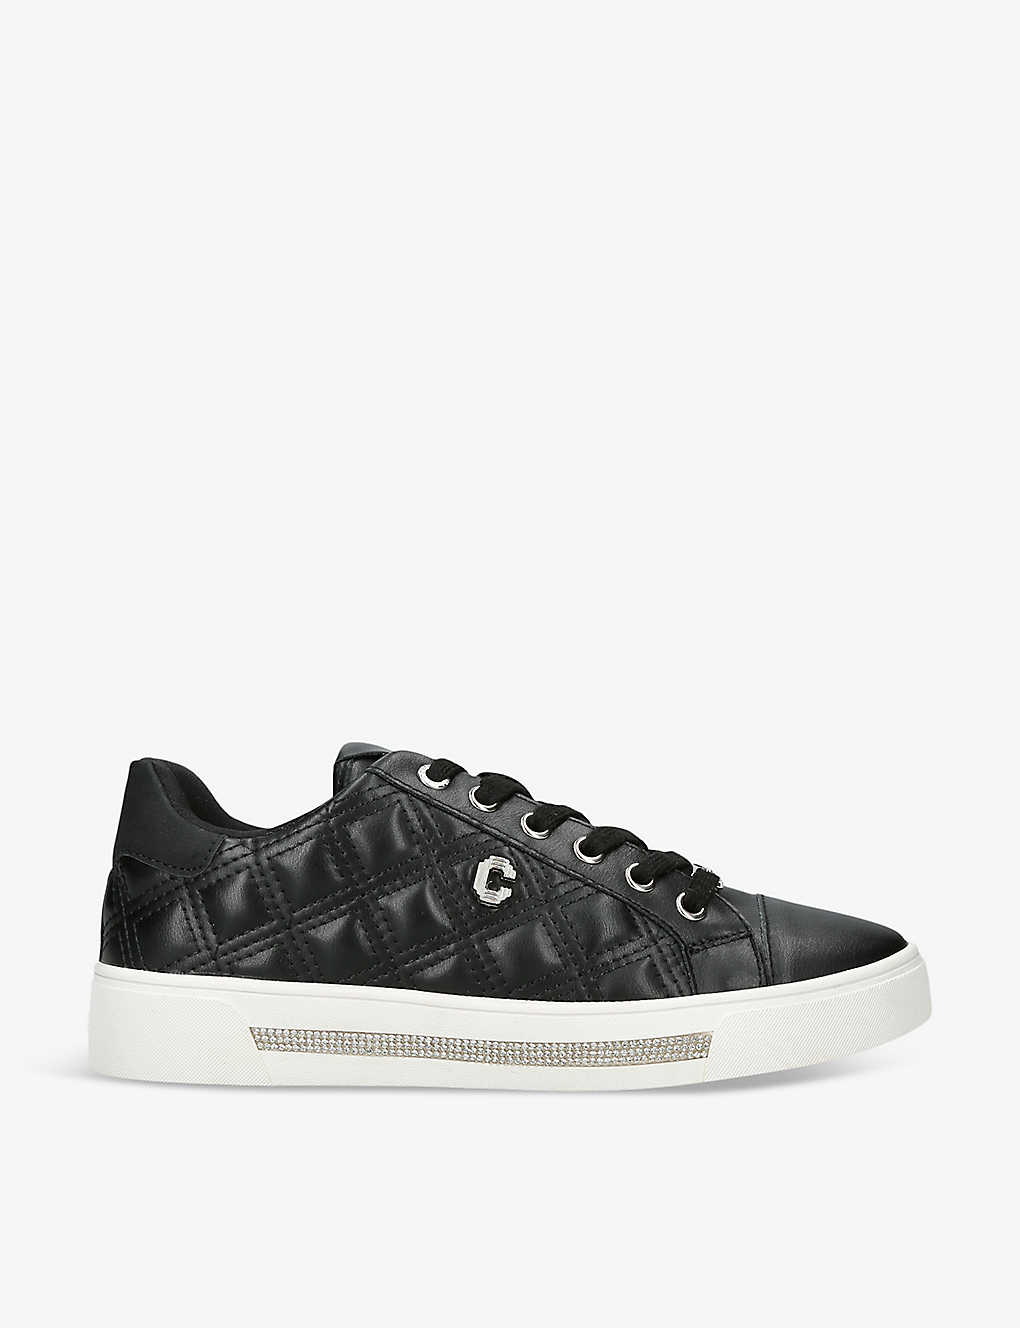 Carvela Womens Black Diamond Quilted Faux-leather Low-top Trainers